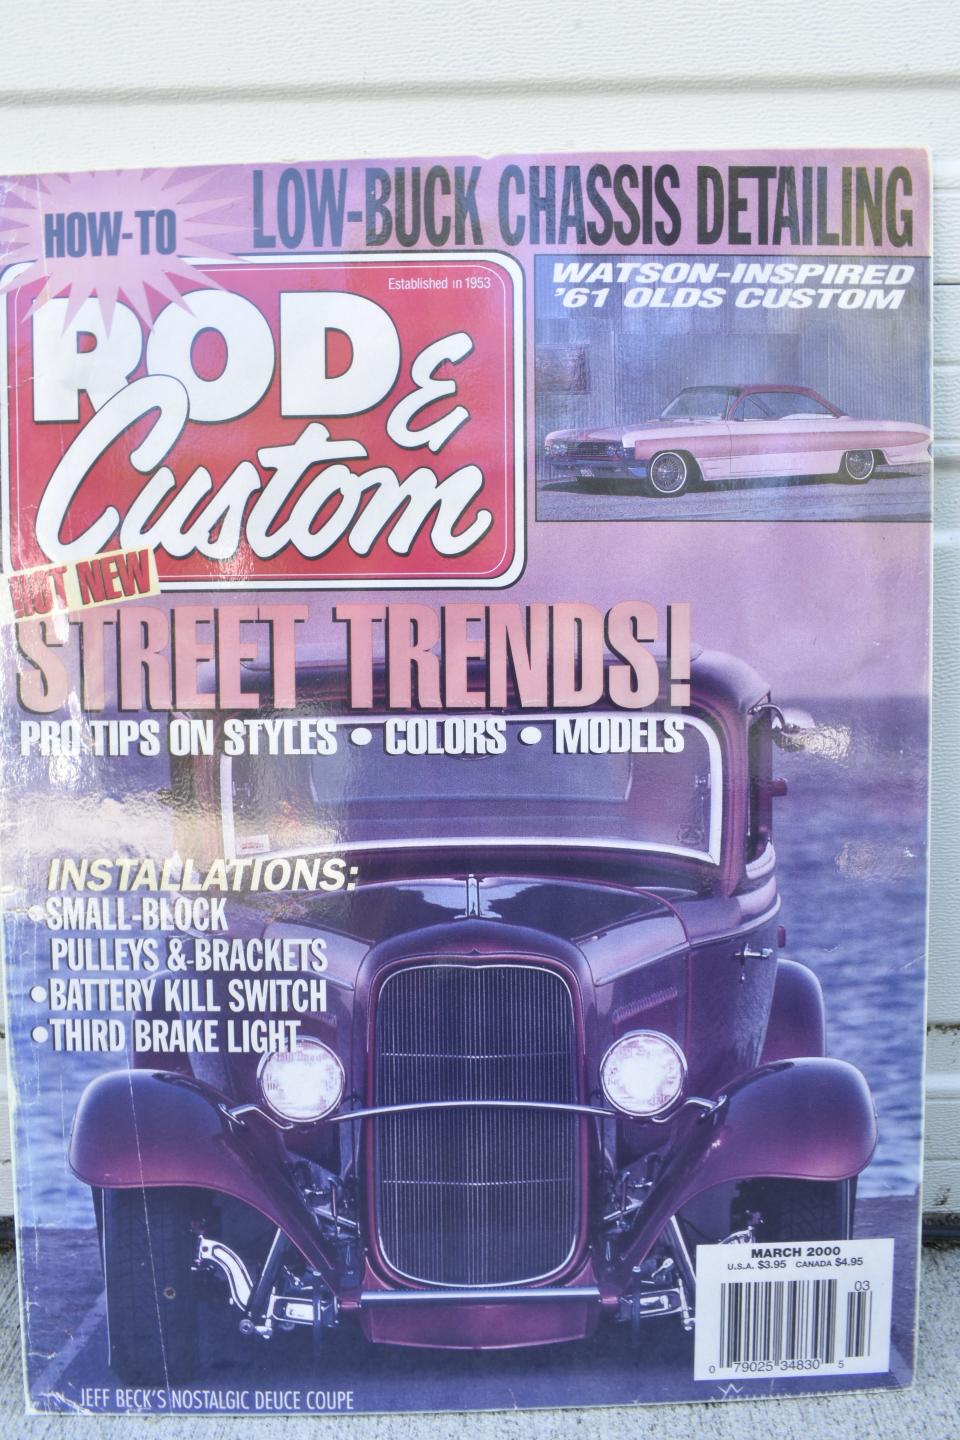 This is the hot rod car magazine cover that got Norman Noe reminiscing about the 1961 Oldsmobile his parents gave him as a high school graduation gift. He didn't realize it was his car pictured.